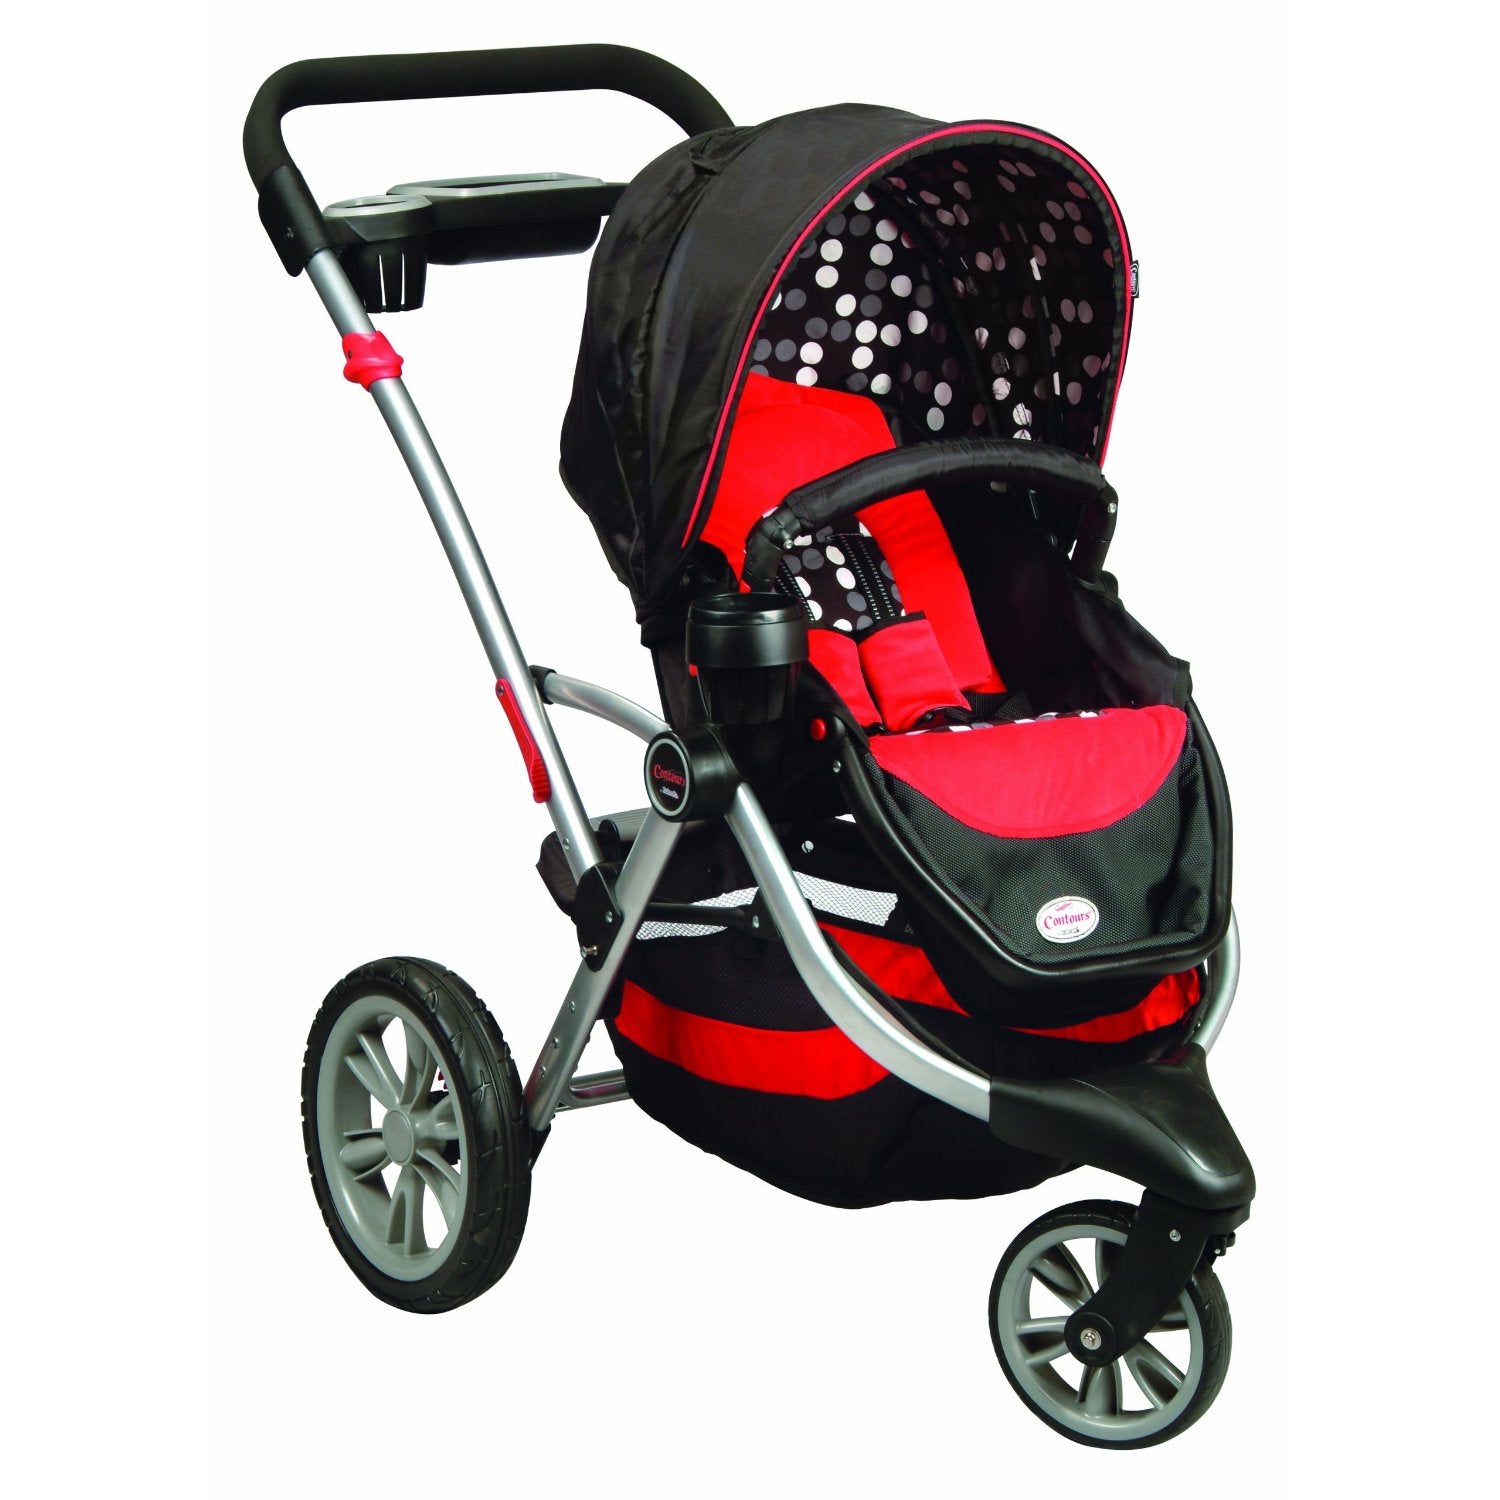 affordable baby strollers